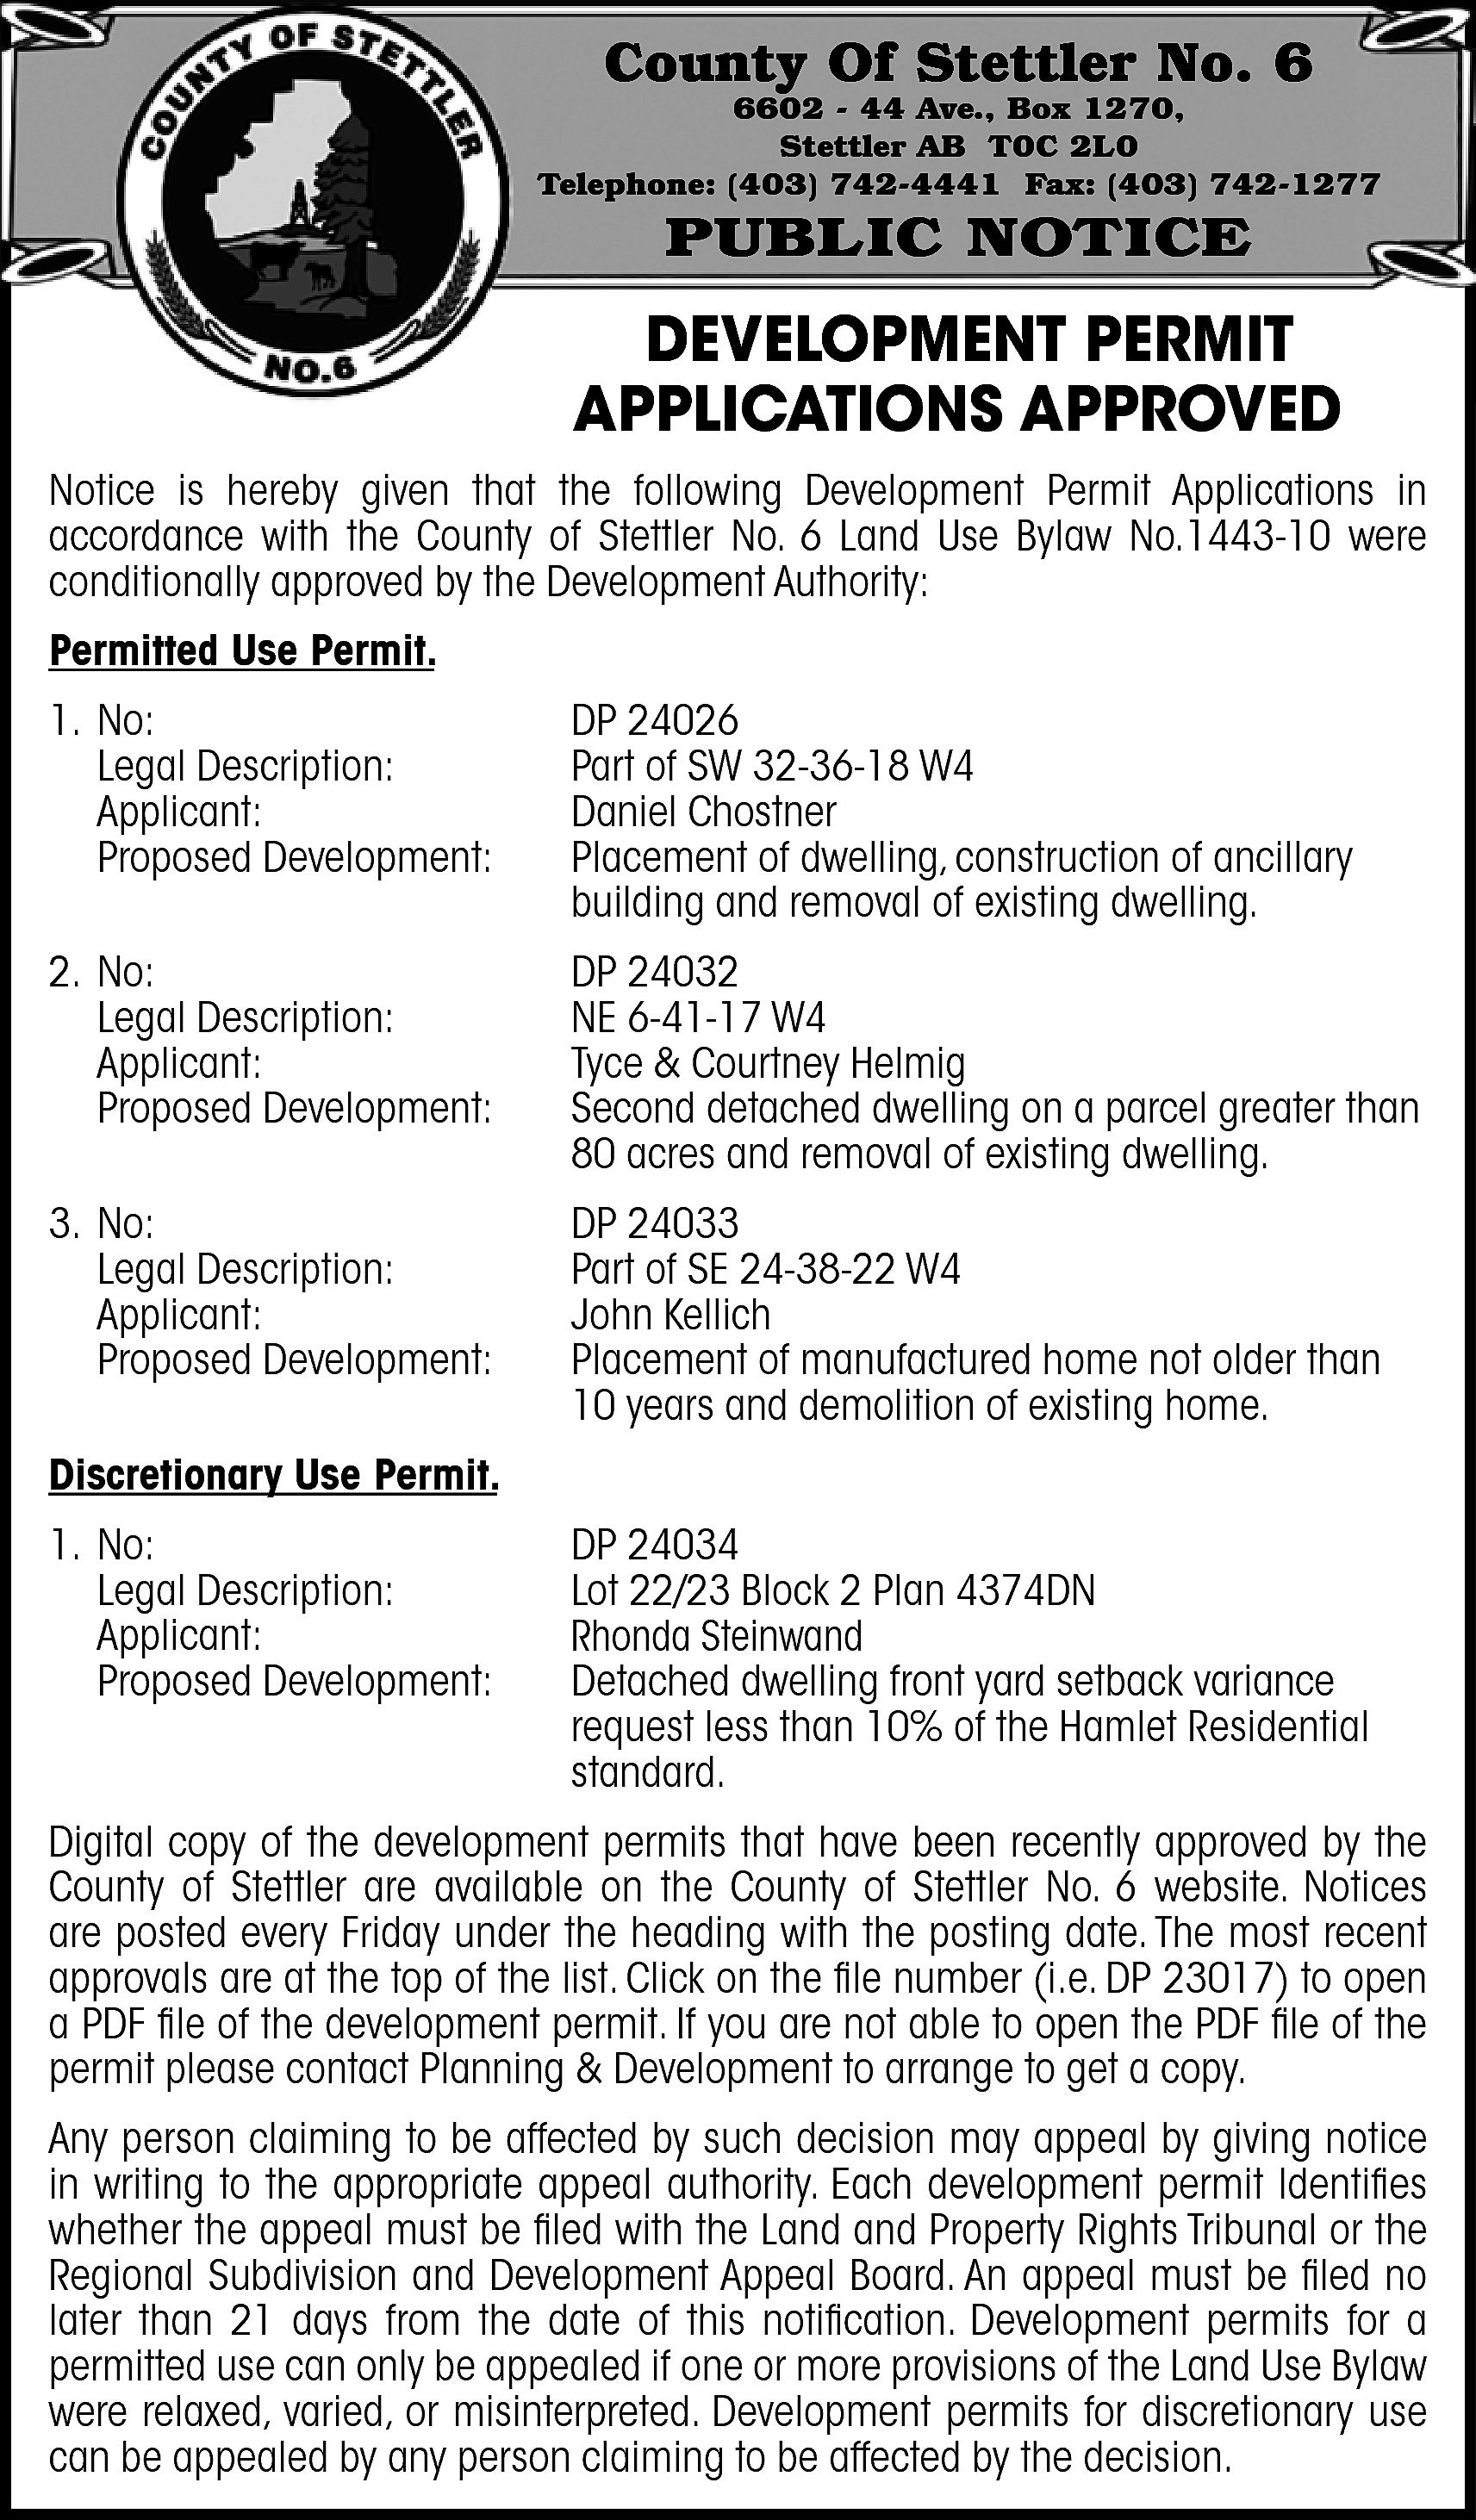 County Of Stettler No. 6  County Of Stettler No. 6    6602 - 44 Ave., Box 1270,  Stettler AB T0C 2L0  Telephone: (403) 742-4441 Fax: (403) 742-1277    PUBLIC NOTICE    DEVELOPMENT PERMIT  APPLICATIONS APPROVED  Notice is hereby given that the following Development Permit Applications in  accordance with the County of Stettler No. 6 Land Use Bylaw No.1443-10 were  conditionally approved by the Development Authority:  Permitted Use Permit.  1. No:  Legal Description:  Applicant:  Proposed Development:    DP 24026  Part of SW 32-36-18 W4  Daniel Chostner  Placement of dwelling, construction of ancillary  building and removal of existing dwelling.    2. No:  Legal Description:  Applicant:  Proposed Development:    DP 24032  NE 6-41-17 W4  Tyce & Courtney Helmig  Second detached dwelling on a parcel greater than  80 acres and removal of existing dwelling.    3. No:  Legal Description:  Applicant:  Proposed Development:    DP 24033  Part of SE 24-38-22 W4  John Kellich  Placement of manufactured home not older than  10 years and demolition of existing home.    Discretionary Use Permit.  1. No:  Legal Description:  Applicant:  Proposed Development:    DP 24034  Lot 22/23 Block 2 Plan 4374DN  Rhonda Steinwand  Detached dwelling front yard setback variance  request less than 10% of the Hamlet Residential  standard.    Digital copy of the development permits that have been recently approved by the  County of Stettler are available on the County of Stettler No. 6 website. Notices  are posted every Friday under the heading with the posting date. The most recent  approvals are at the top of the list. Click on the file number (i.e. DP 23017) to open  a PDF file of the development permit. If you are not able to open the PDF file of the  permit please contact Planning & Development to arrange to get a copy.  Any person claiming to be affected by such decision may appeal by giving notice  in writing to the appropriate appeal authority. Each development permit ldentifies  whether the appeal must be filed with the Land and Property Rights Tribunal or the  Regional Subdivision and Development Appeal Board. An appeal must be filed no  later than 21 days from the date of this notification. Development permits for a  permitted use can only be appealed if one or more provisions of the Land Use Bylaw  were relaxed, varied, or misinterpreted. Development permits for discretionary use  can be appealed by any person claiming to be affected by the decision.    